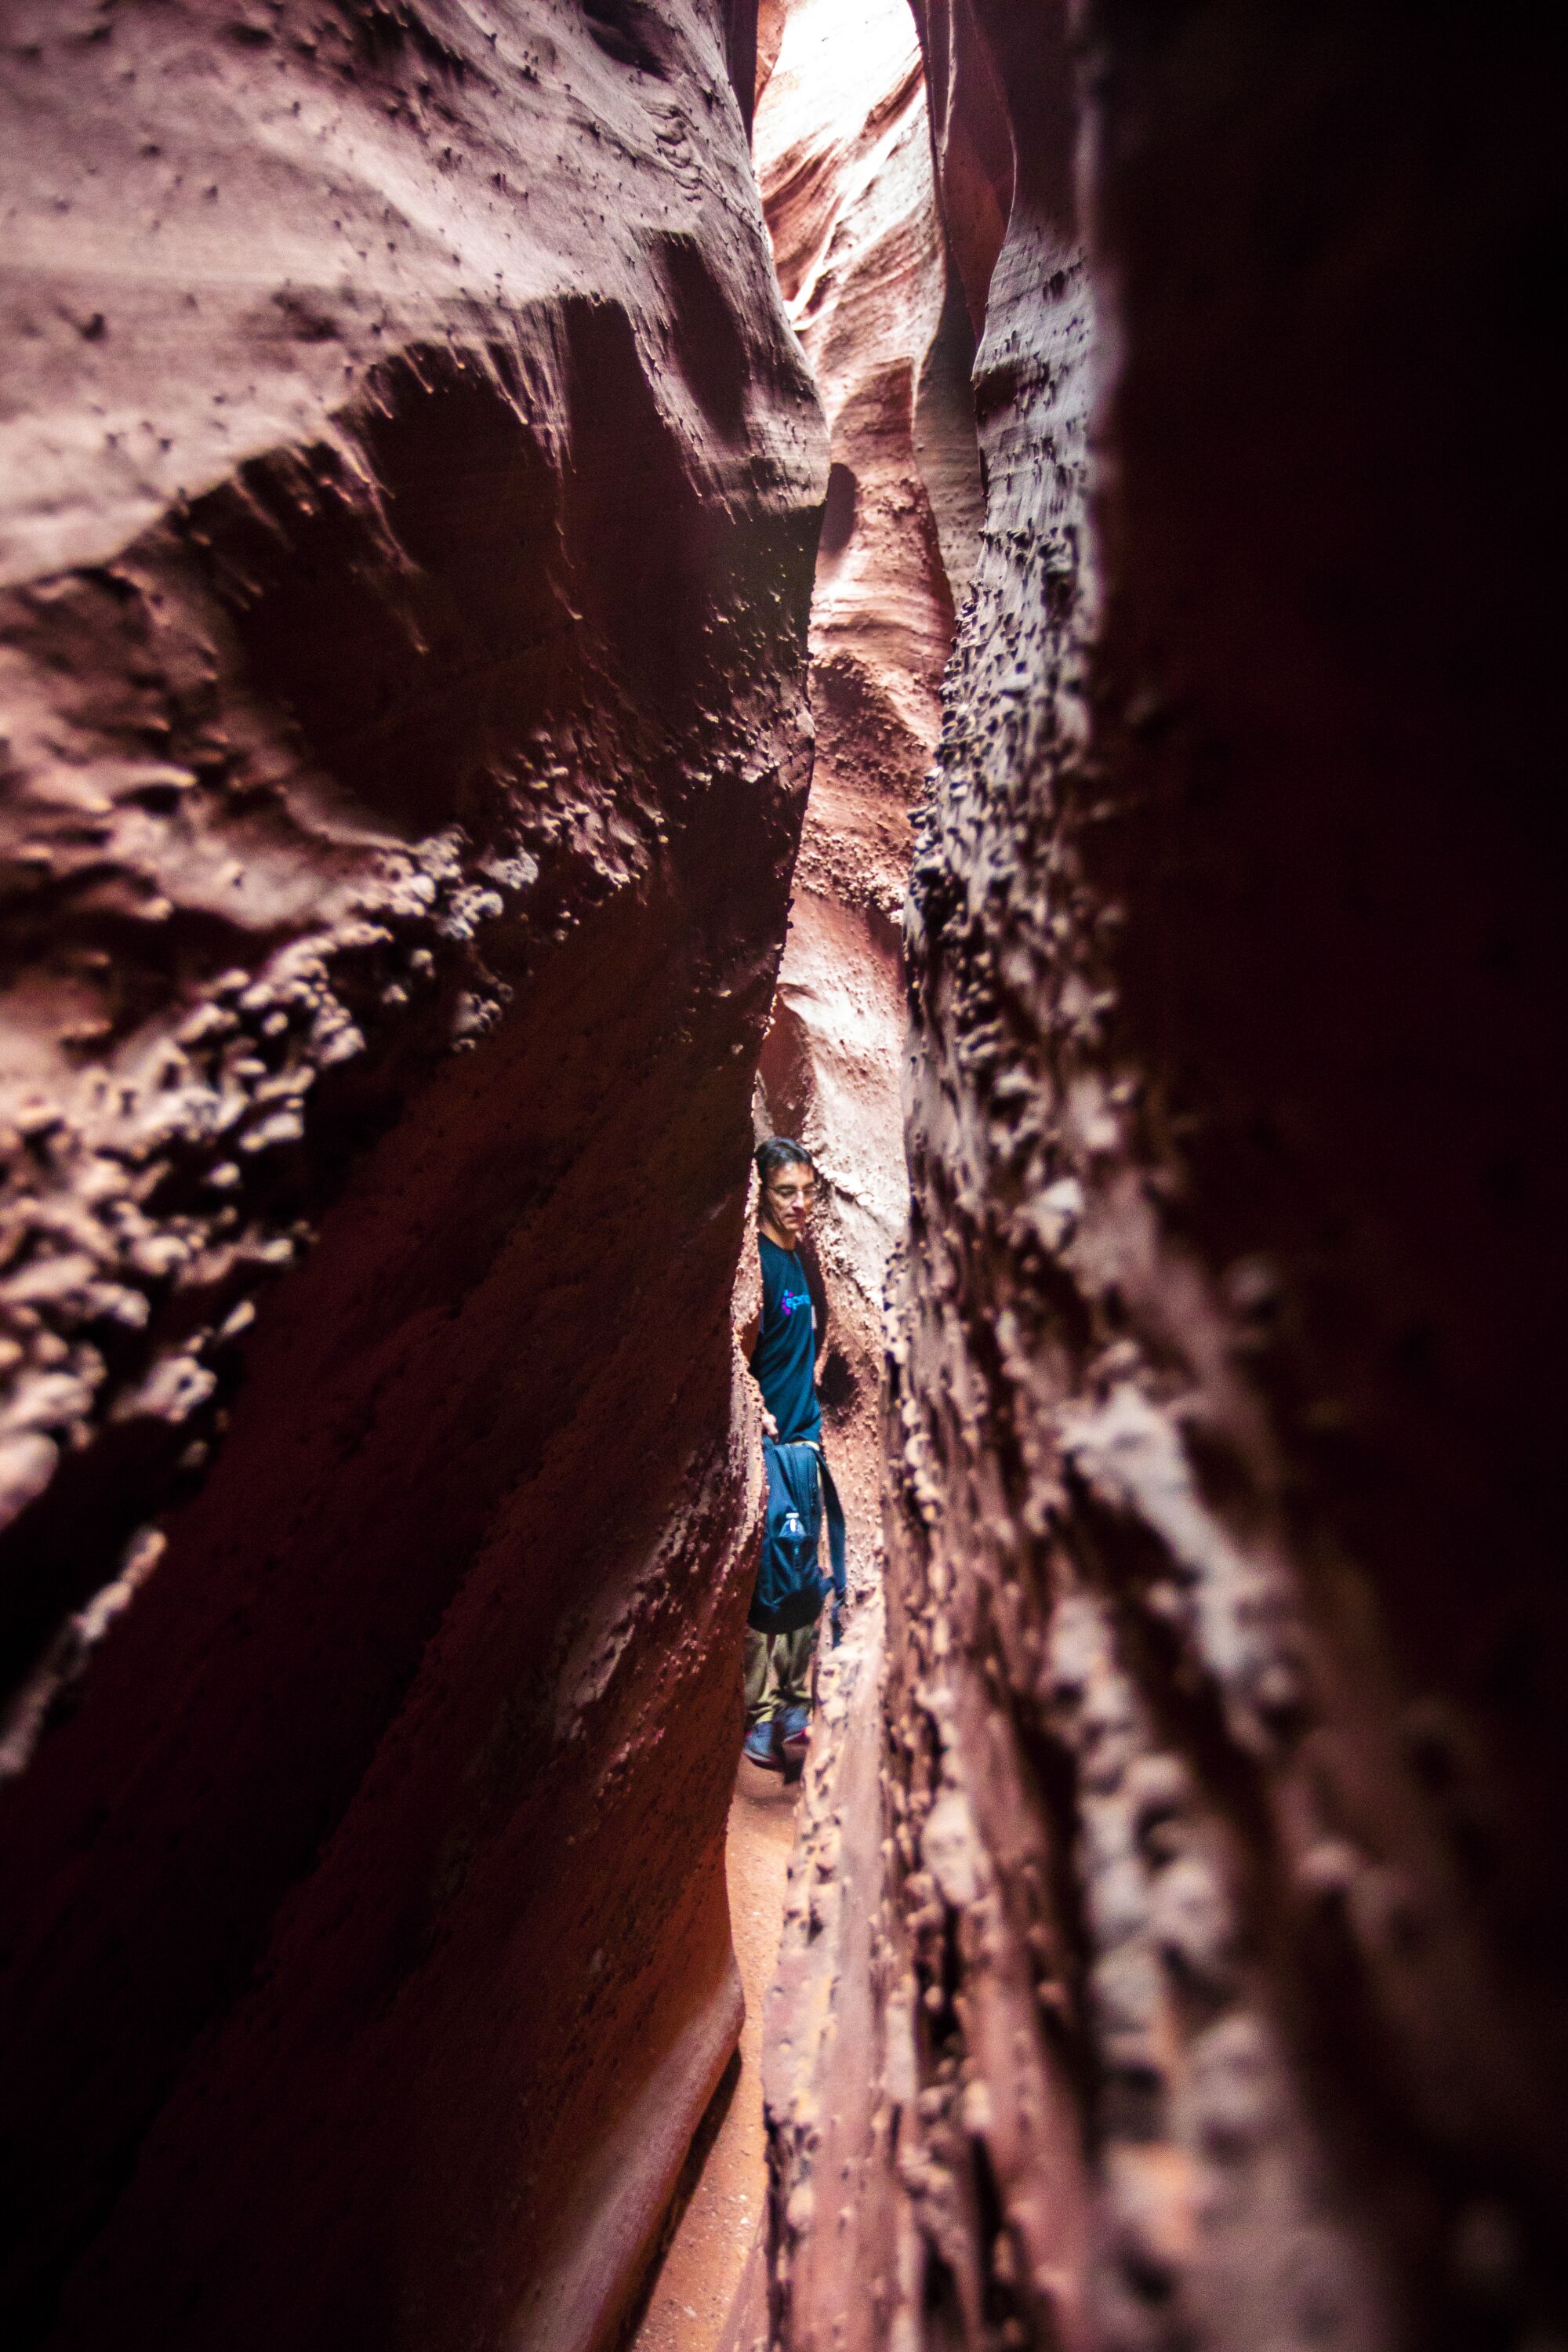 A hiker contemplates the narrow walls of Spooky Gulch.